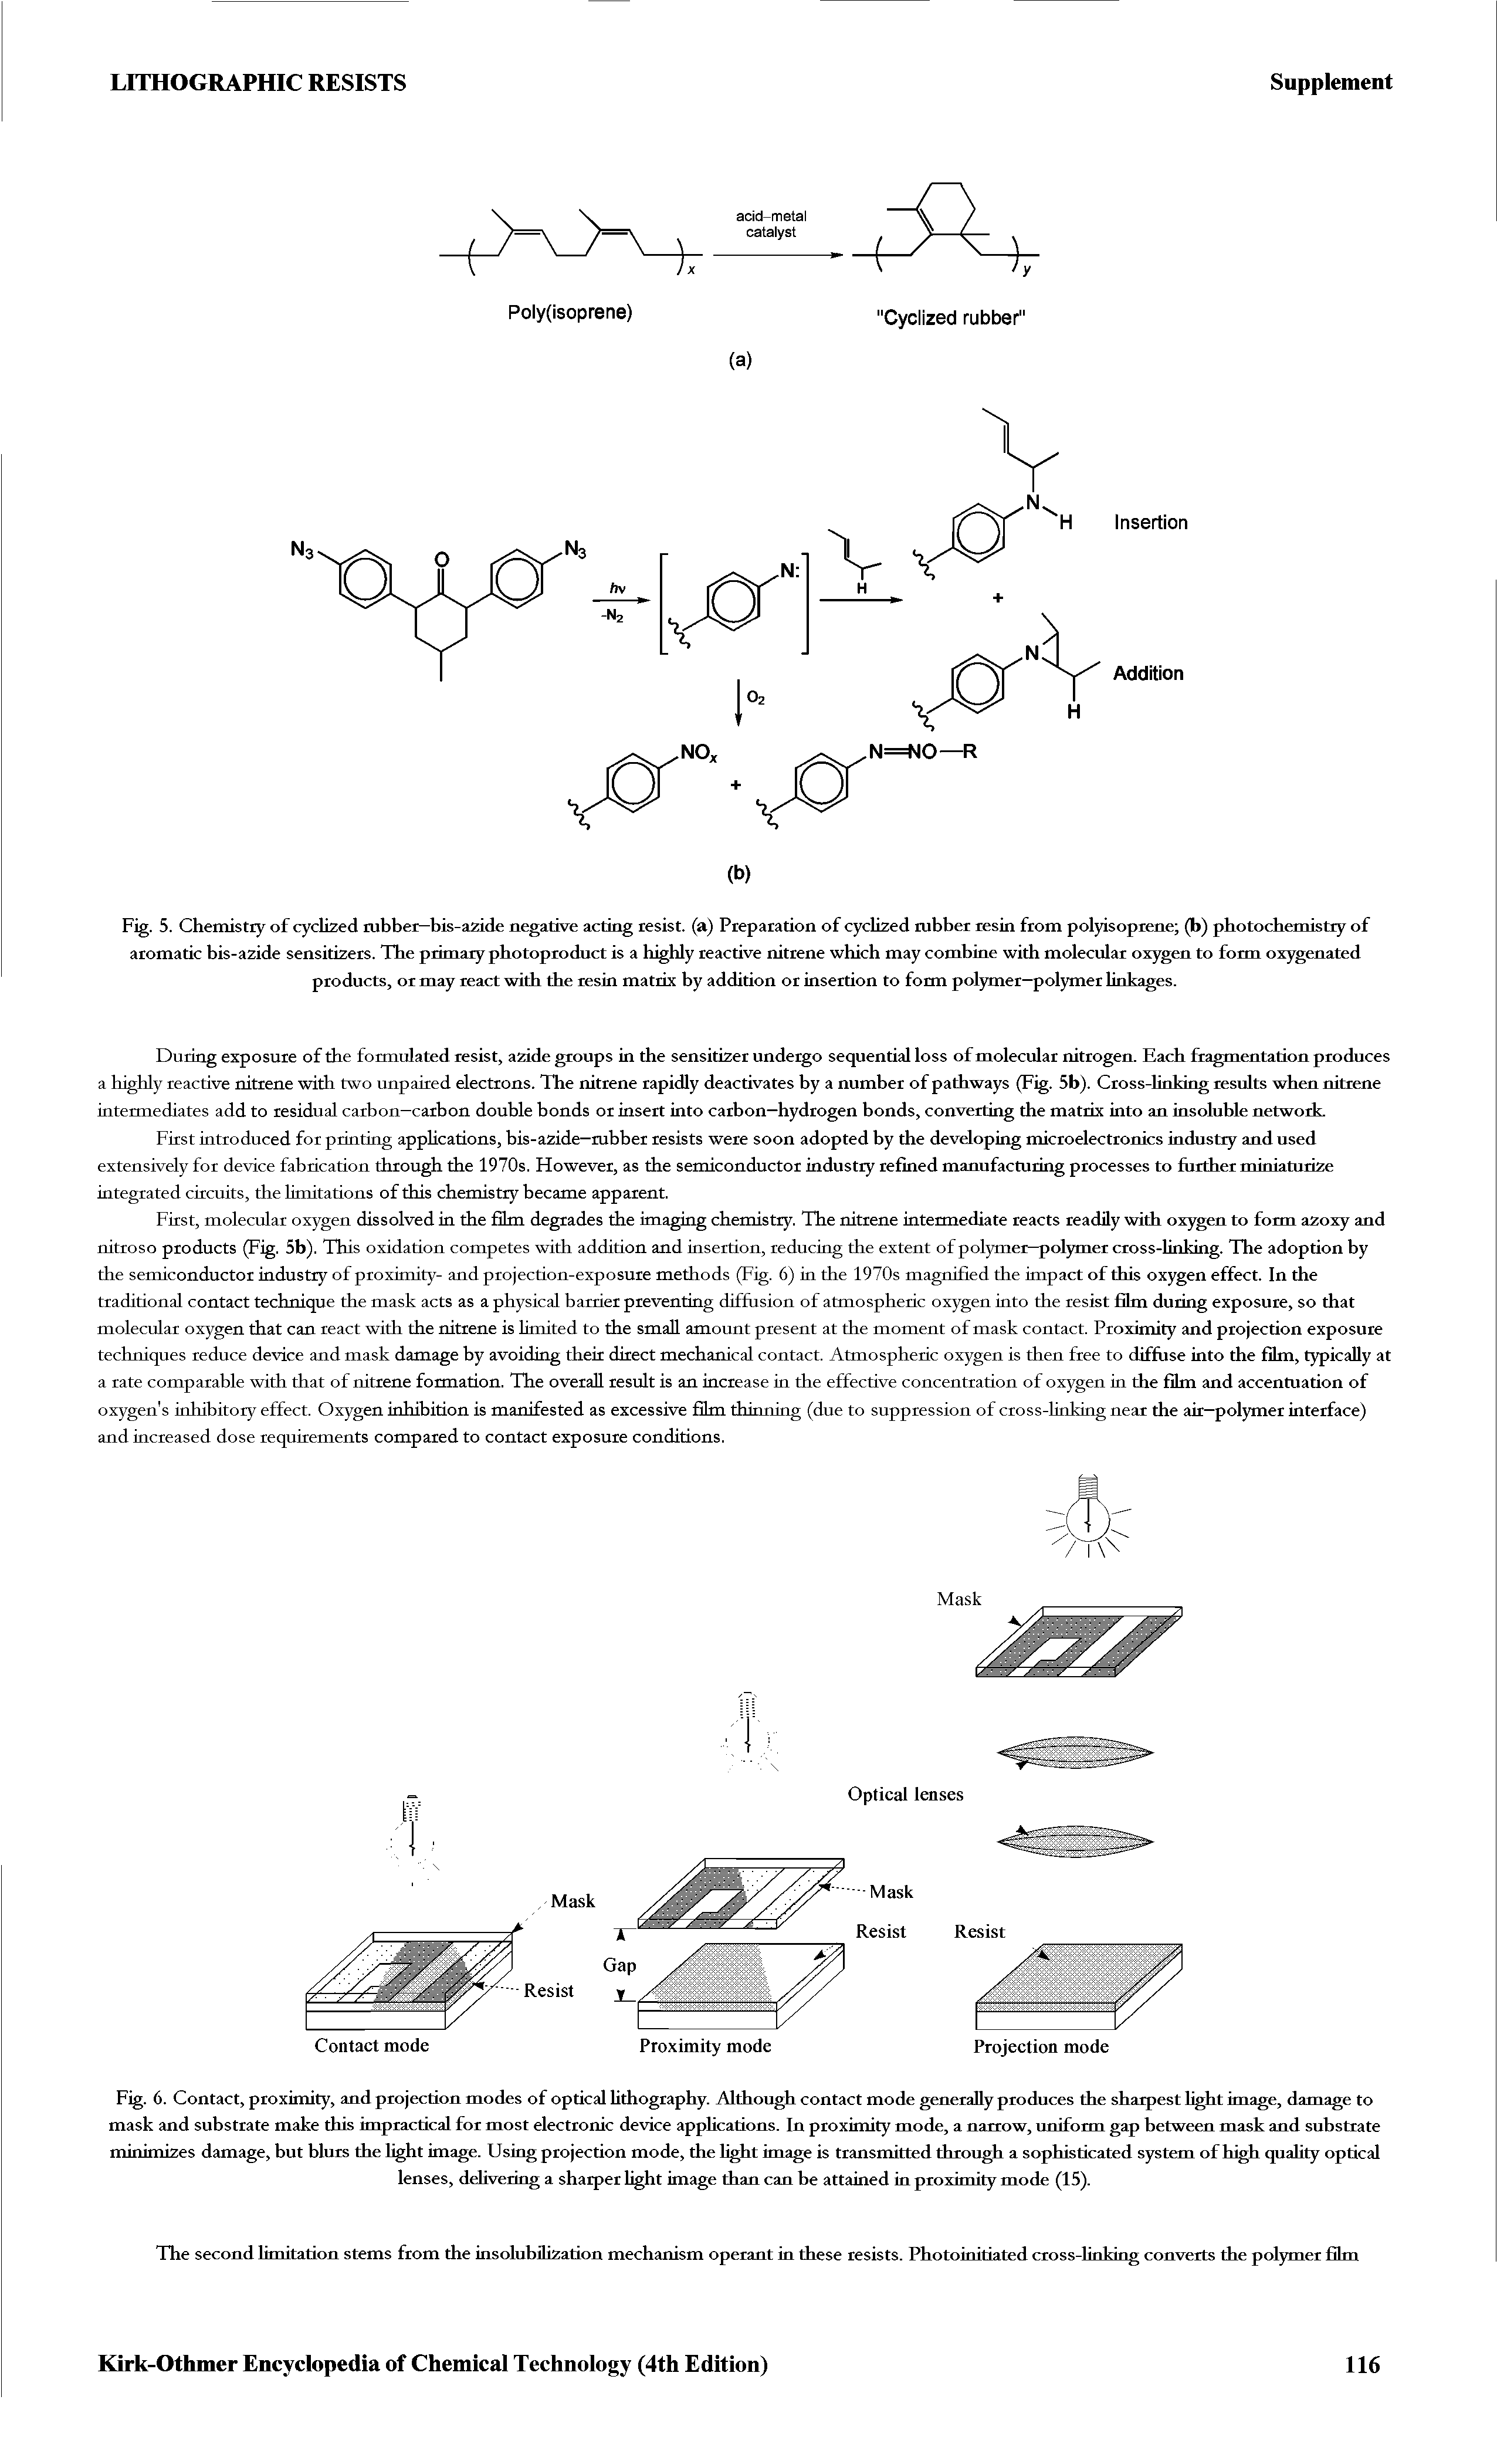 Fig. 5. Chemistry of cyclized rubber—bis-azide negative acting resist, (a) Preparation of cyclized rubber resin from polyisoprene (b) photochemistry of aromatic bis-azide sensitizers. The primary photoproduct is a highly reactive nitrene which may combine with molecular oxygen to form oxygenated products, or may react with the resin matrix by addition or insertion to form polymer—polymer linkages.